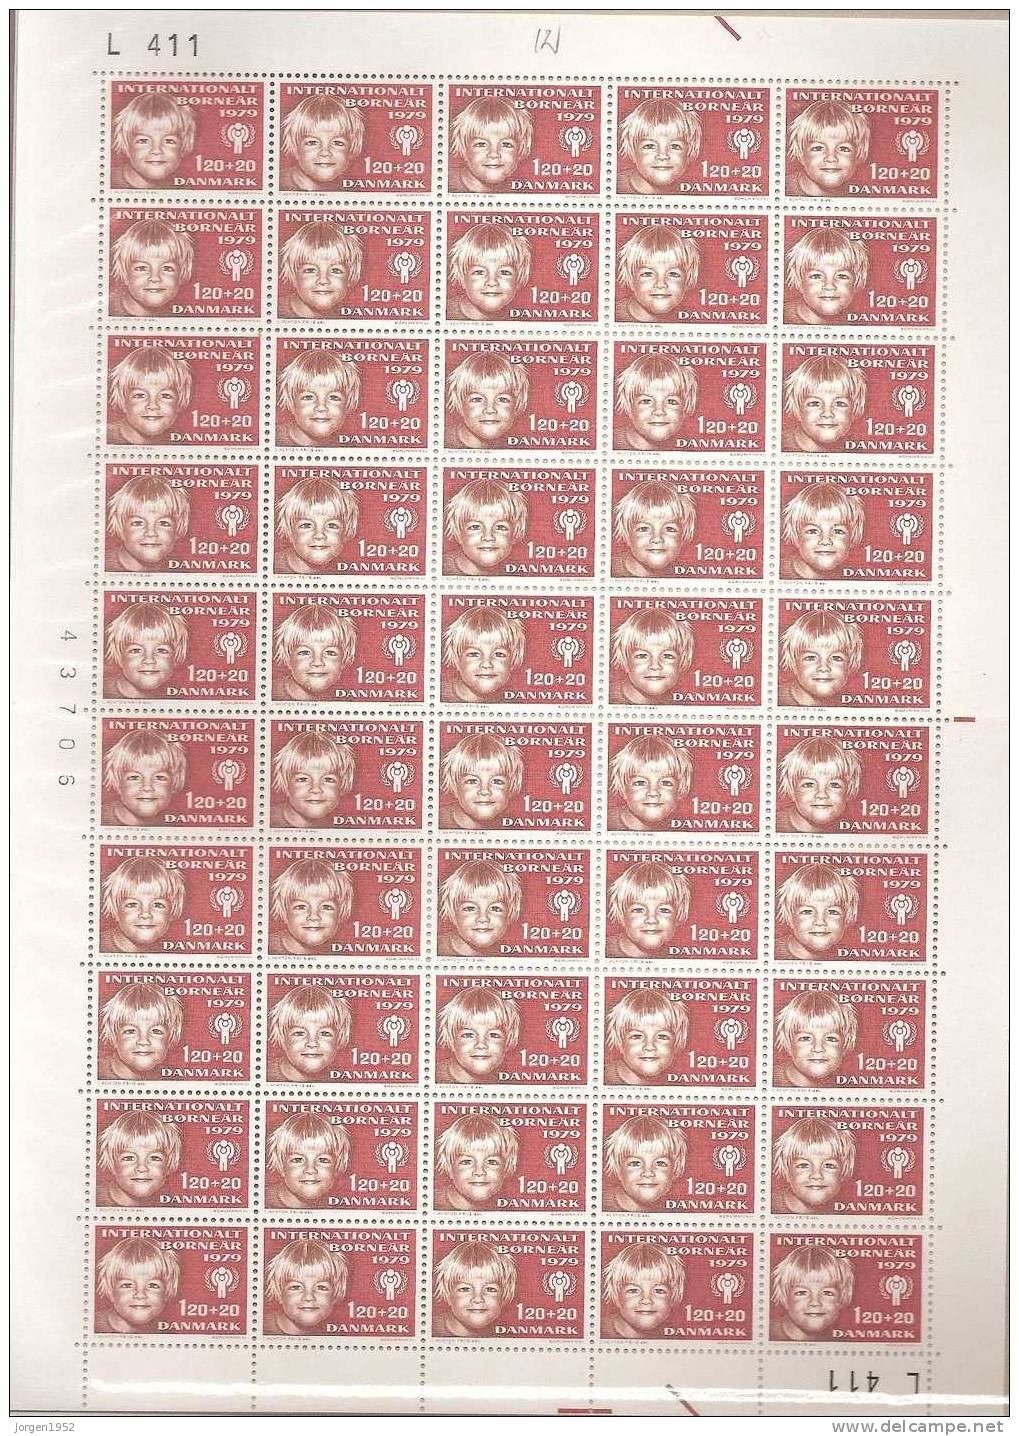 DENMARK SHEETS  FROM  YEAR 1979 MARGINAL NUMBER   L 411 - Fogli Completi